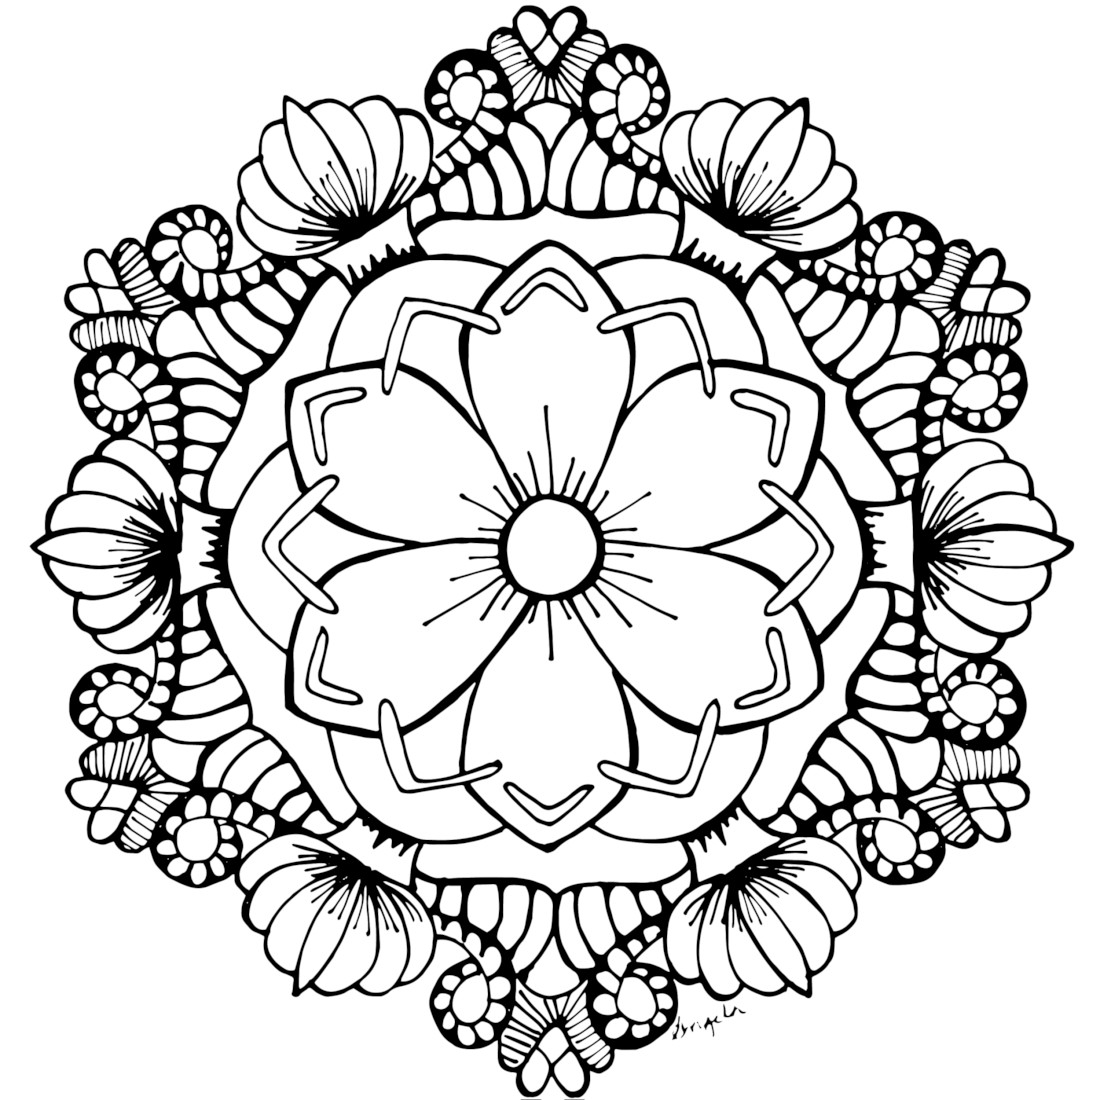 Flowers Coloring Pages For Adults
 FREE Adult Coloring Pages 35 Gorgeous Printable Coloring